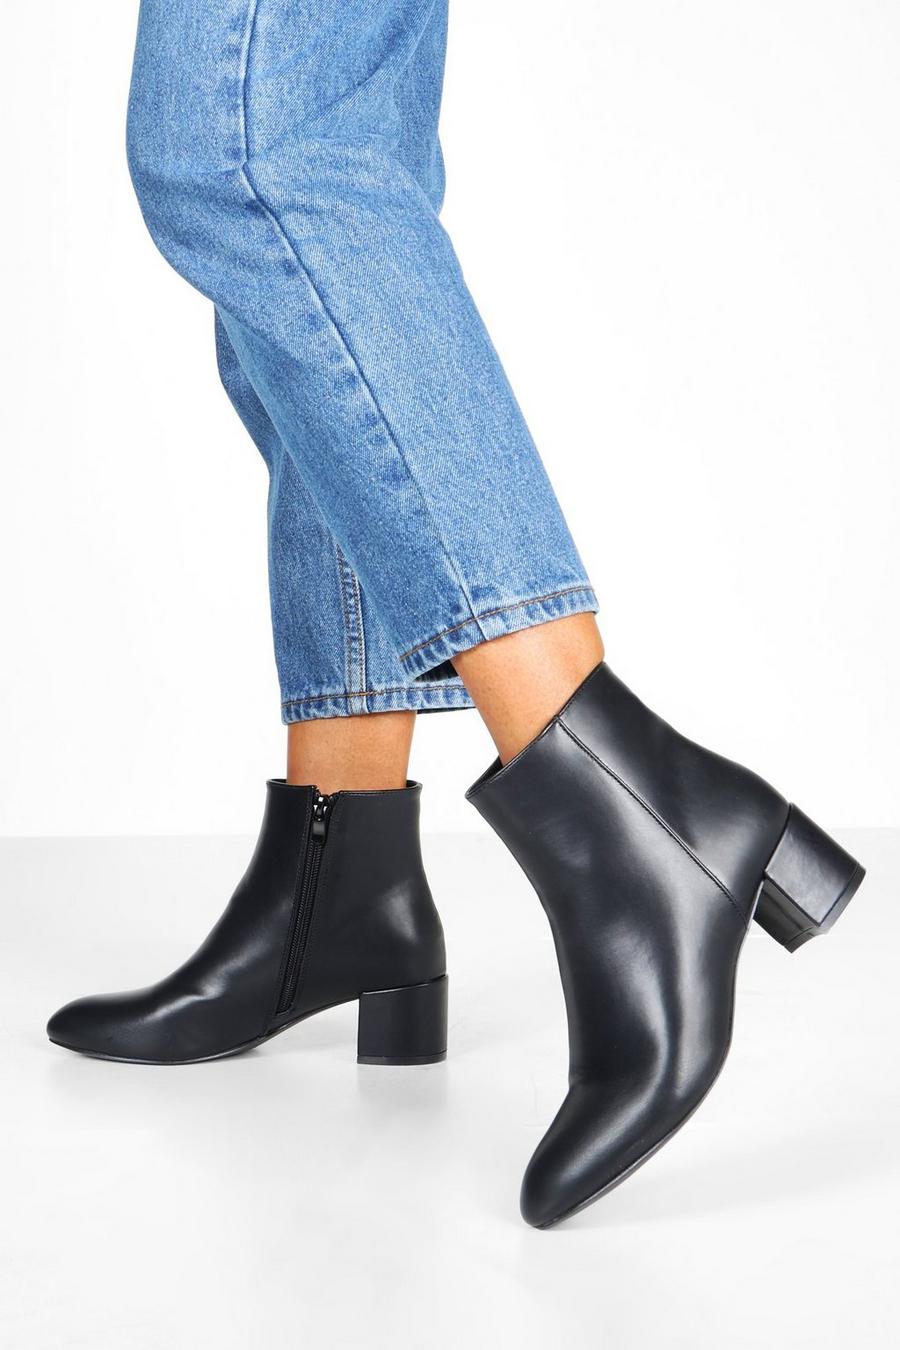 Women's Ankle Boots & Booties